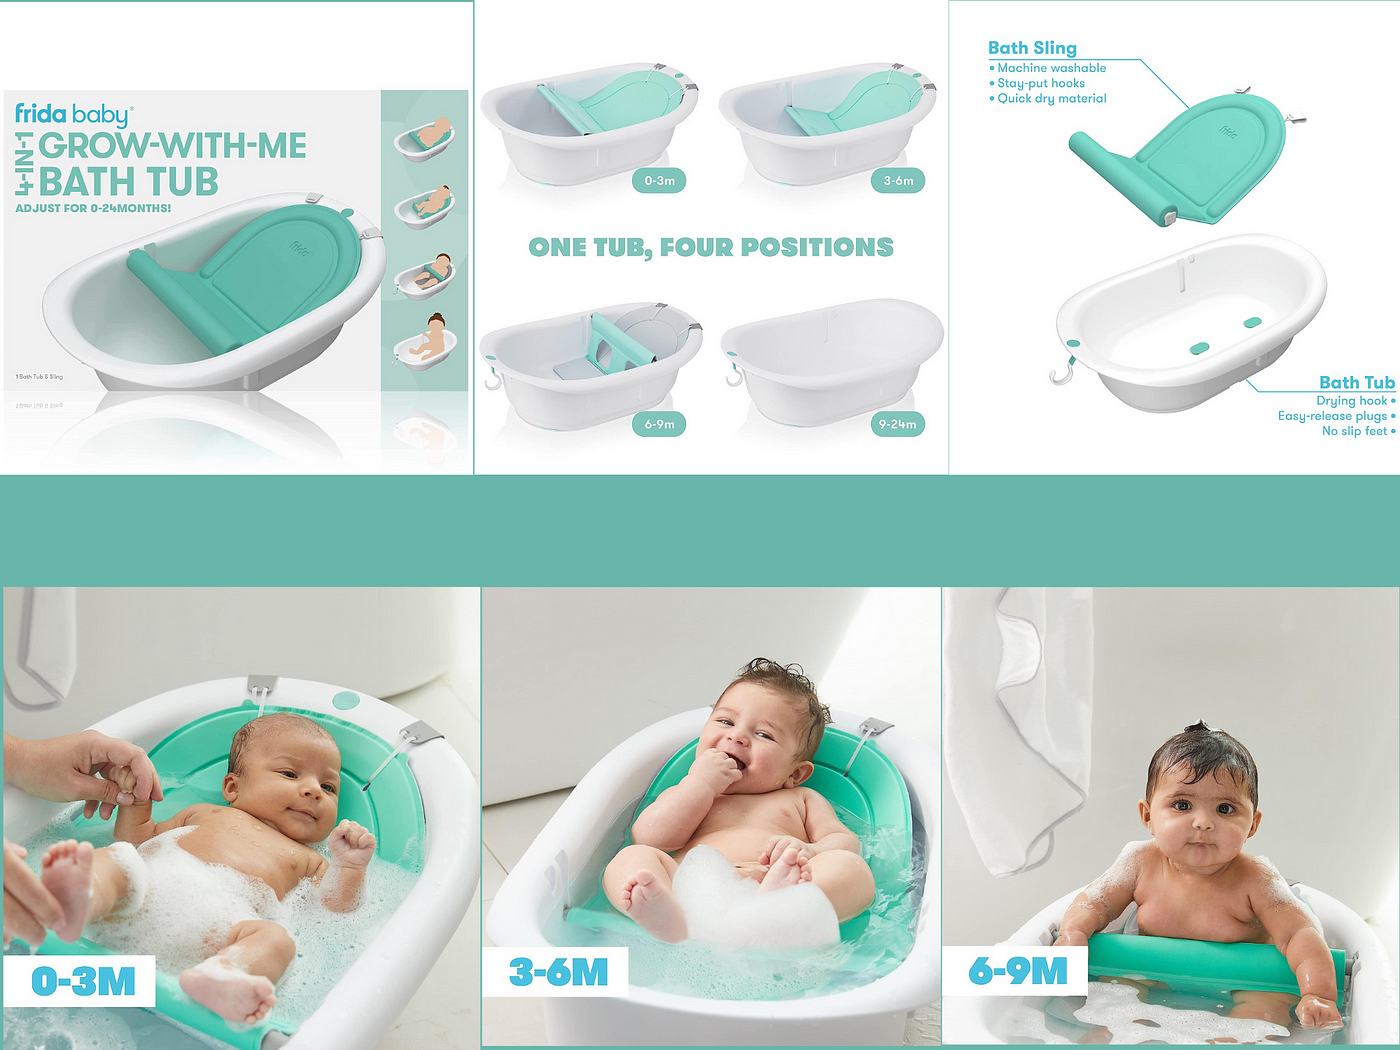 Product details about Frida Baby 4-in-1 Grow-with-Me Bath Tub, Transforms  Infant Bathtub to Toddler Bath Seat with Backrest for Assisted Sitting in  Tub, by Smahssan